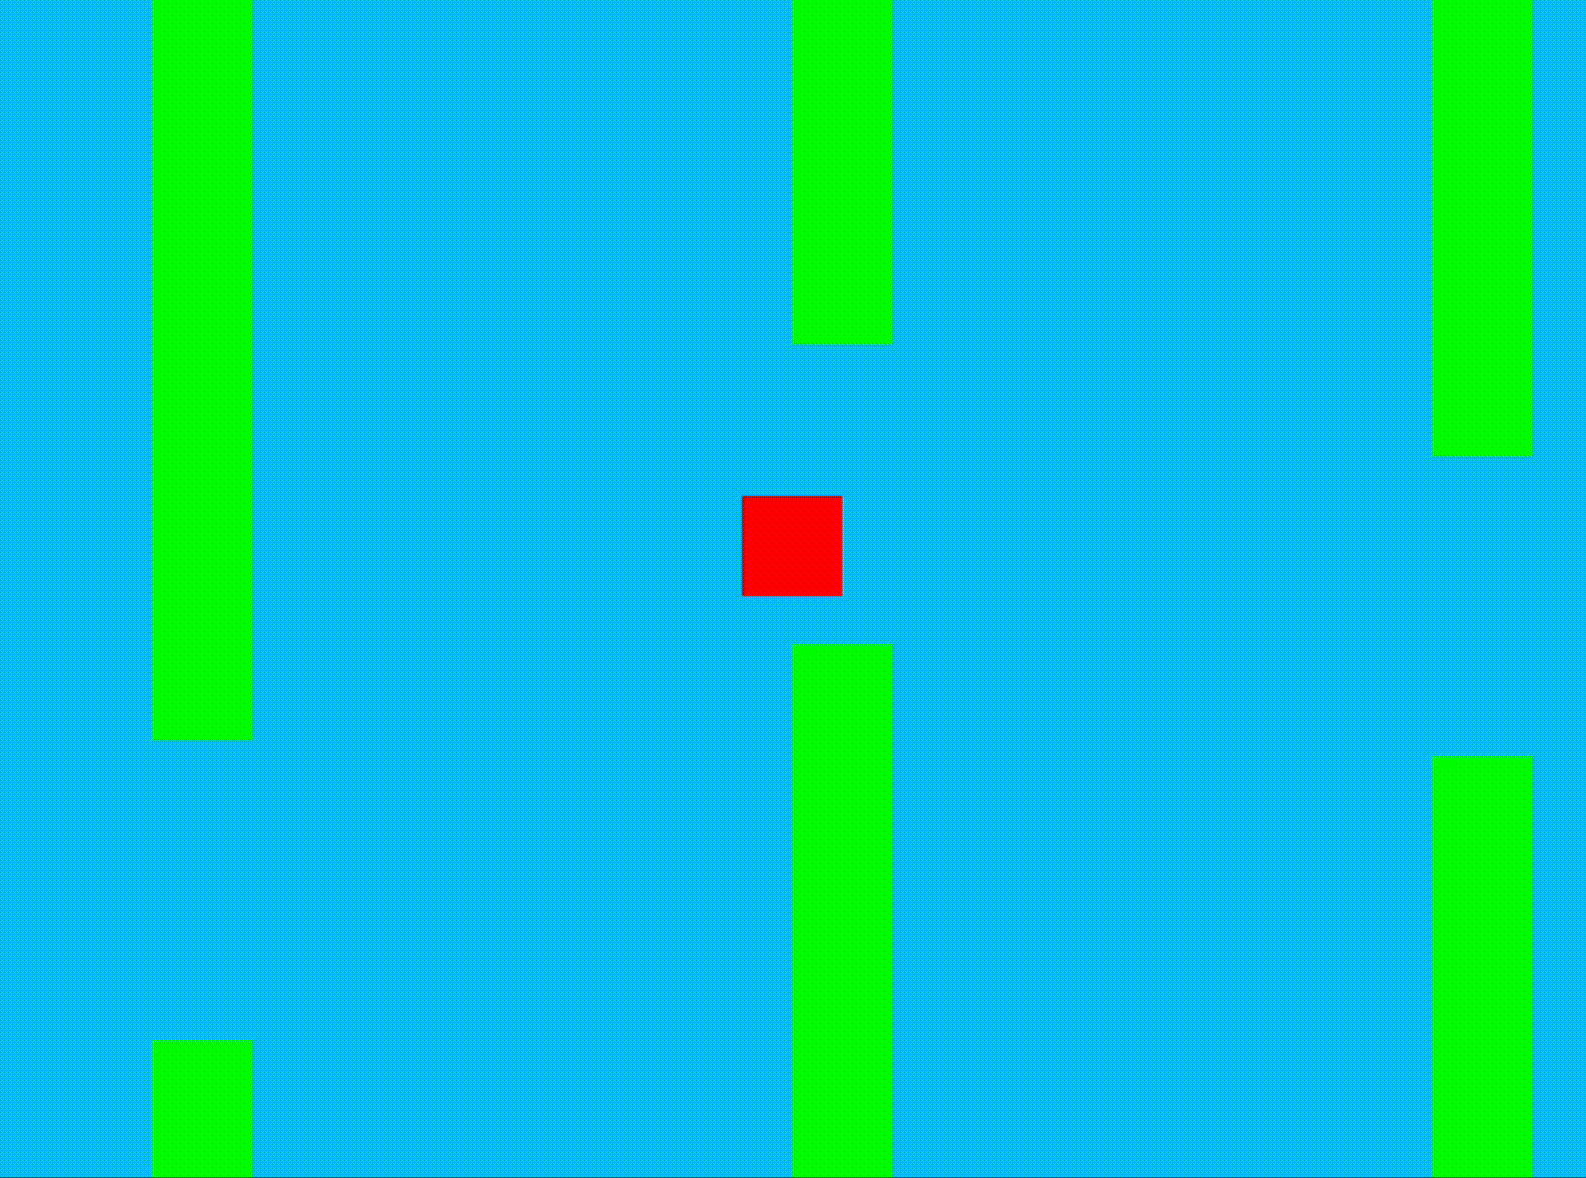 Gif: A red square controlled by the agent moves between green rectangles as it plays a game inspired by Flappy Bird.